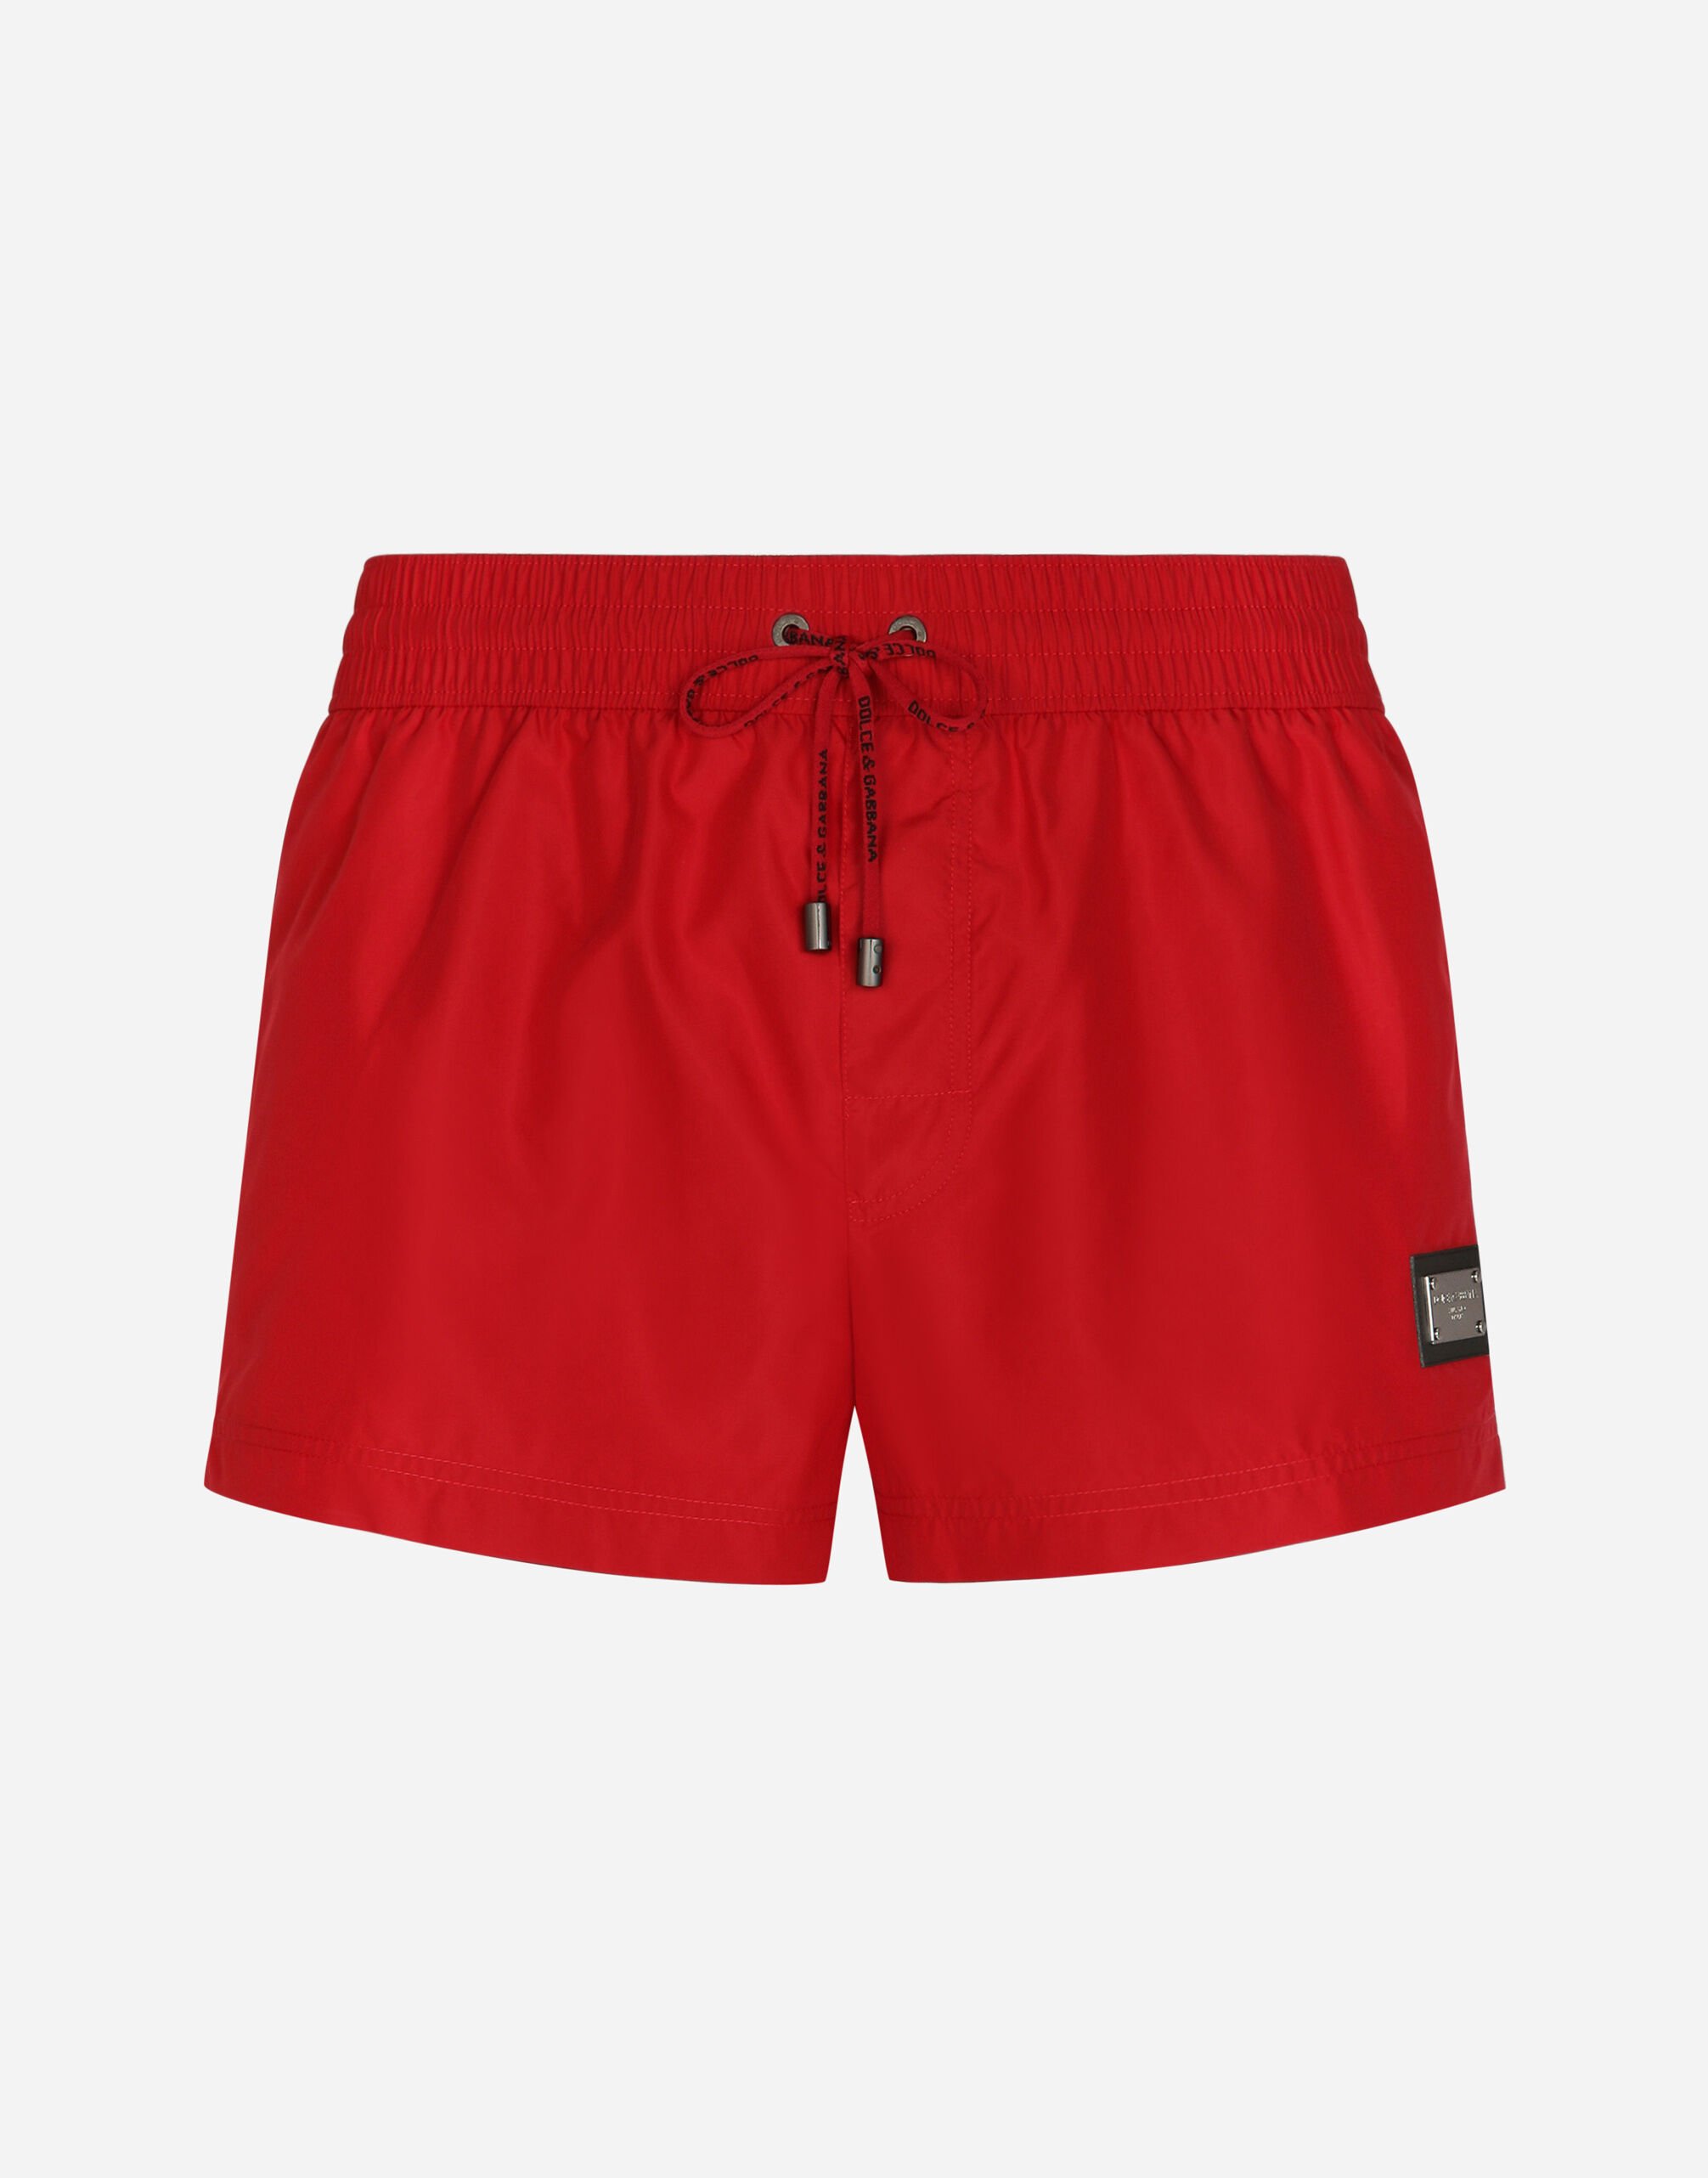 ${brand} Short swim trunks with branded tag ${colorDescription} ${masterID}